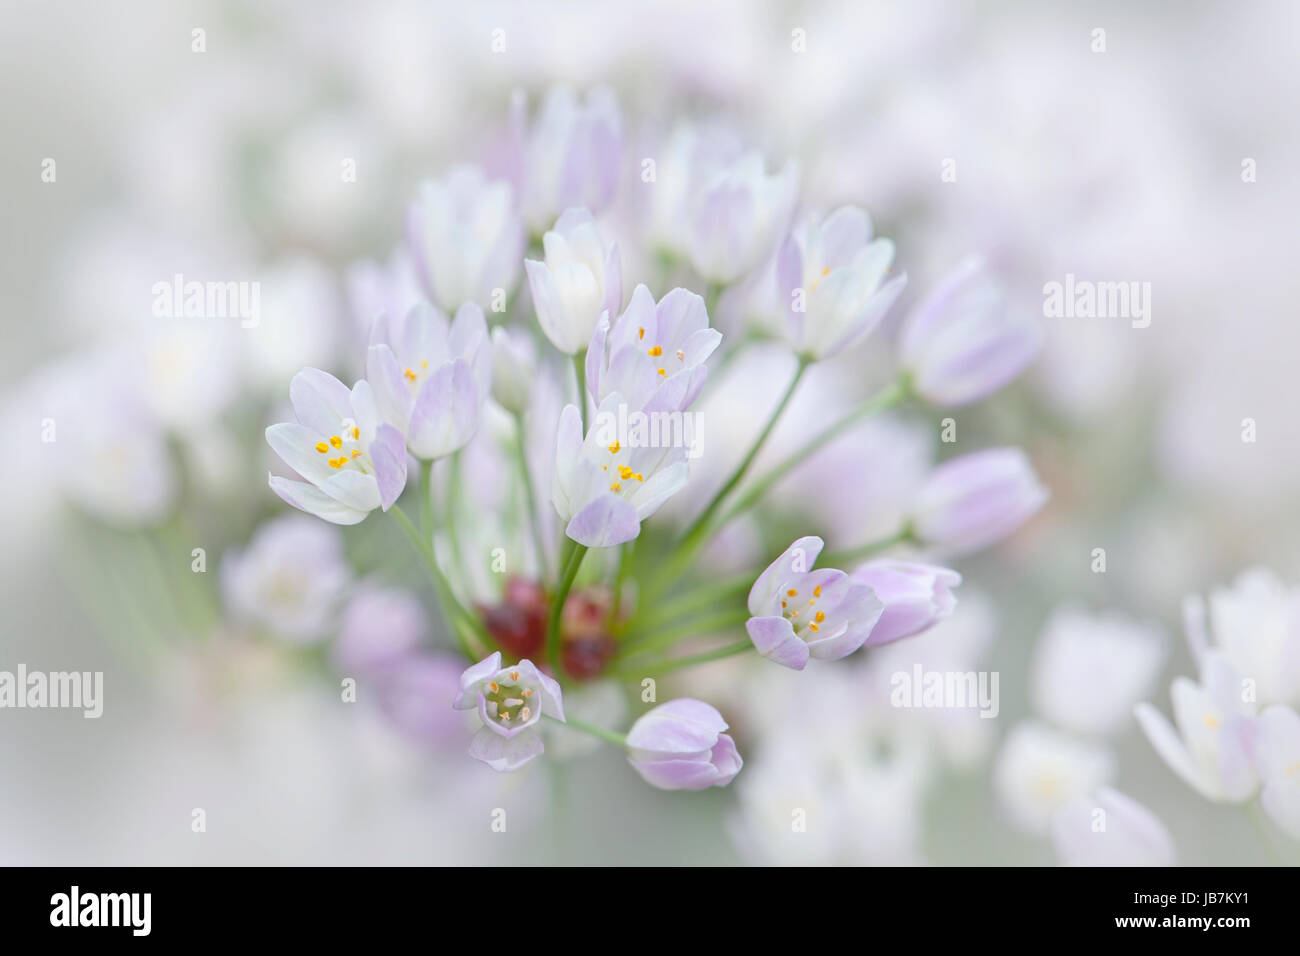 Close-up image of the delicate little Allium roseum flowers also known as rosy-flowered garlic or rosy garlic. Stock Photo